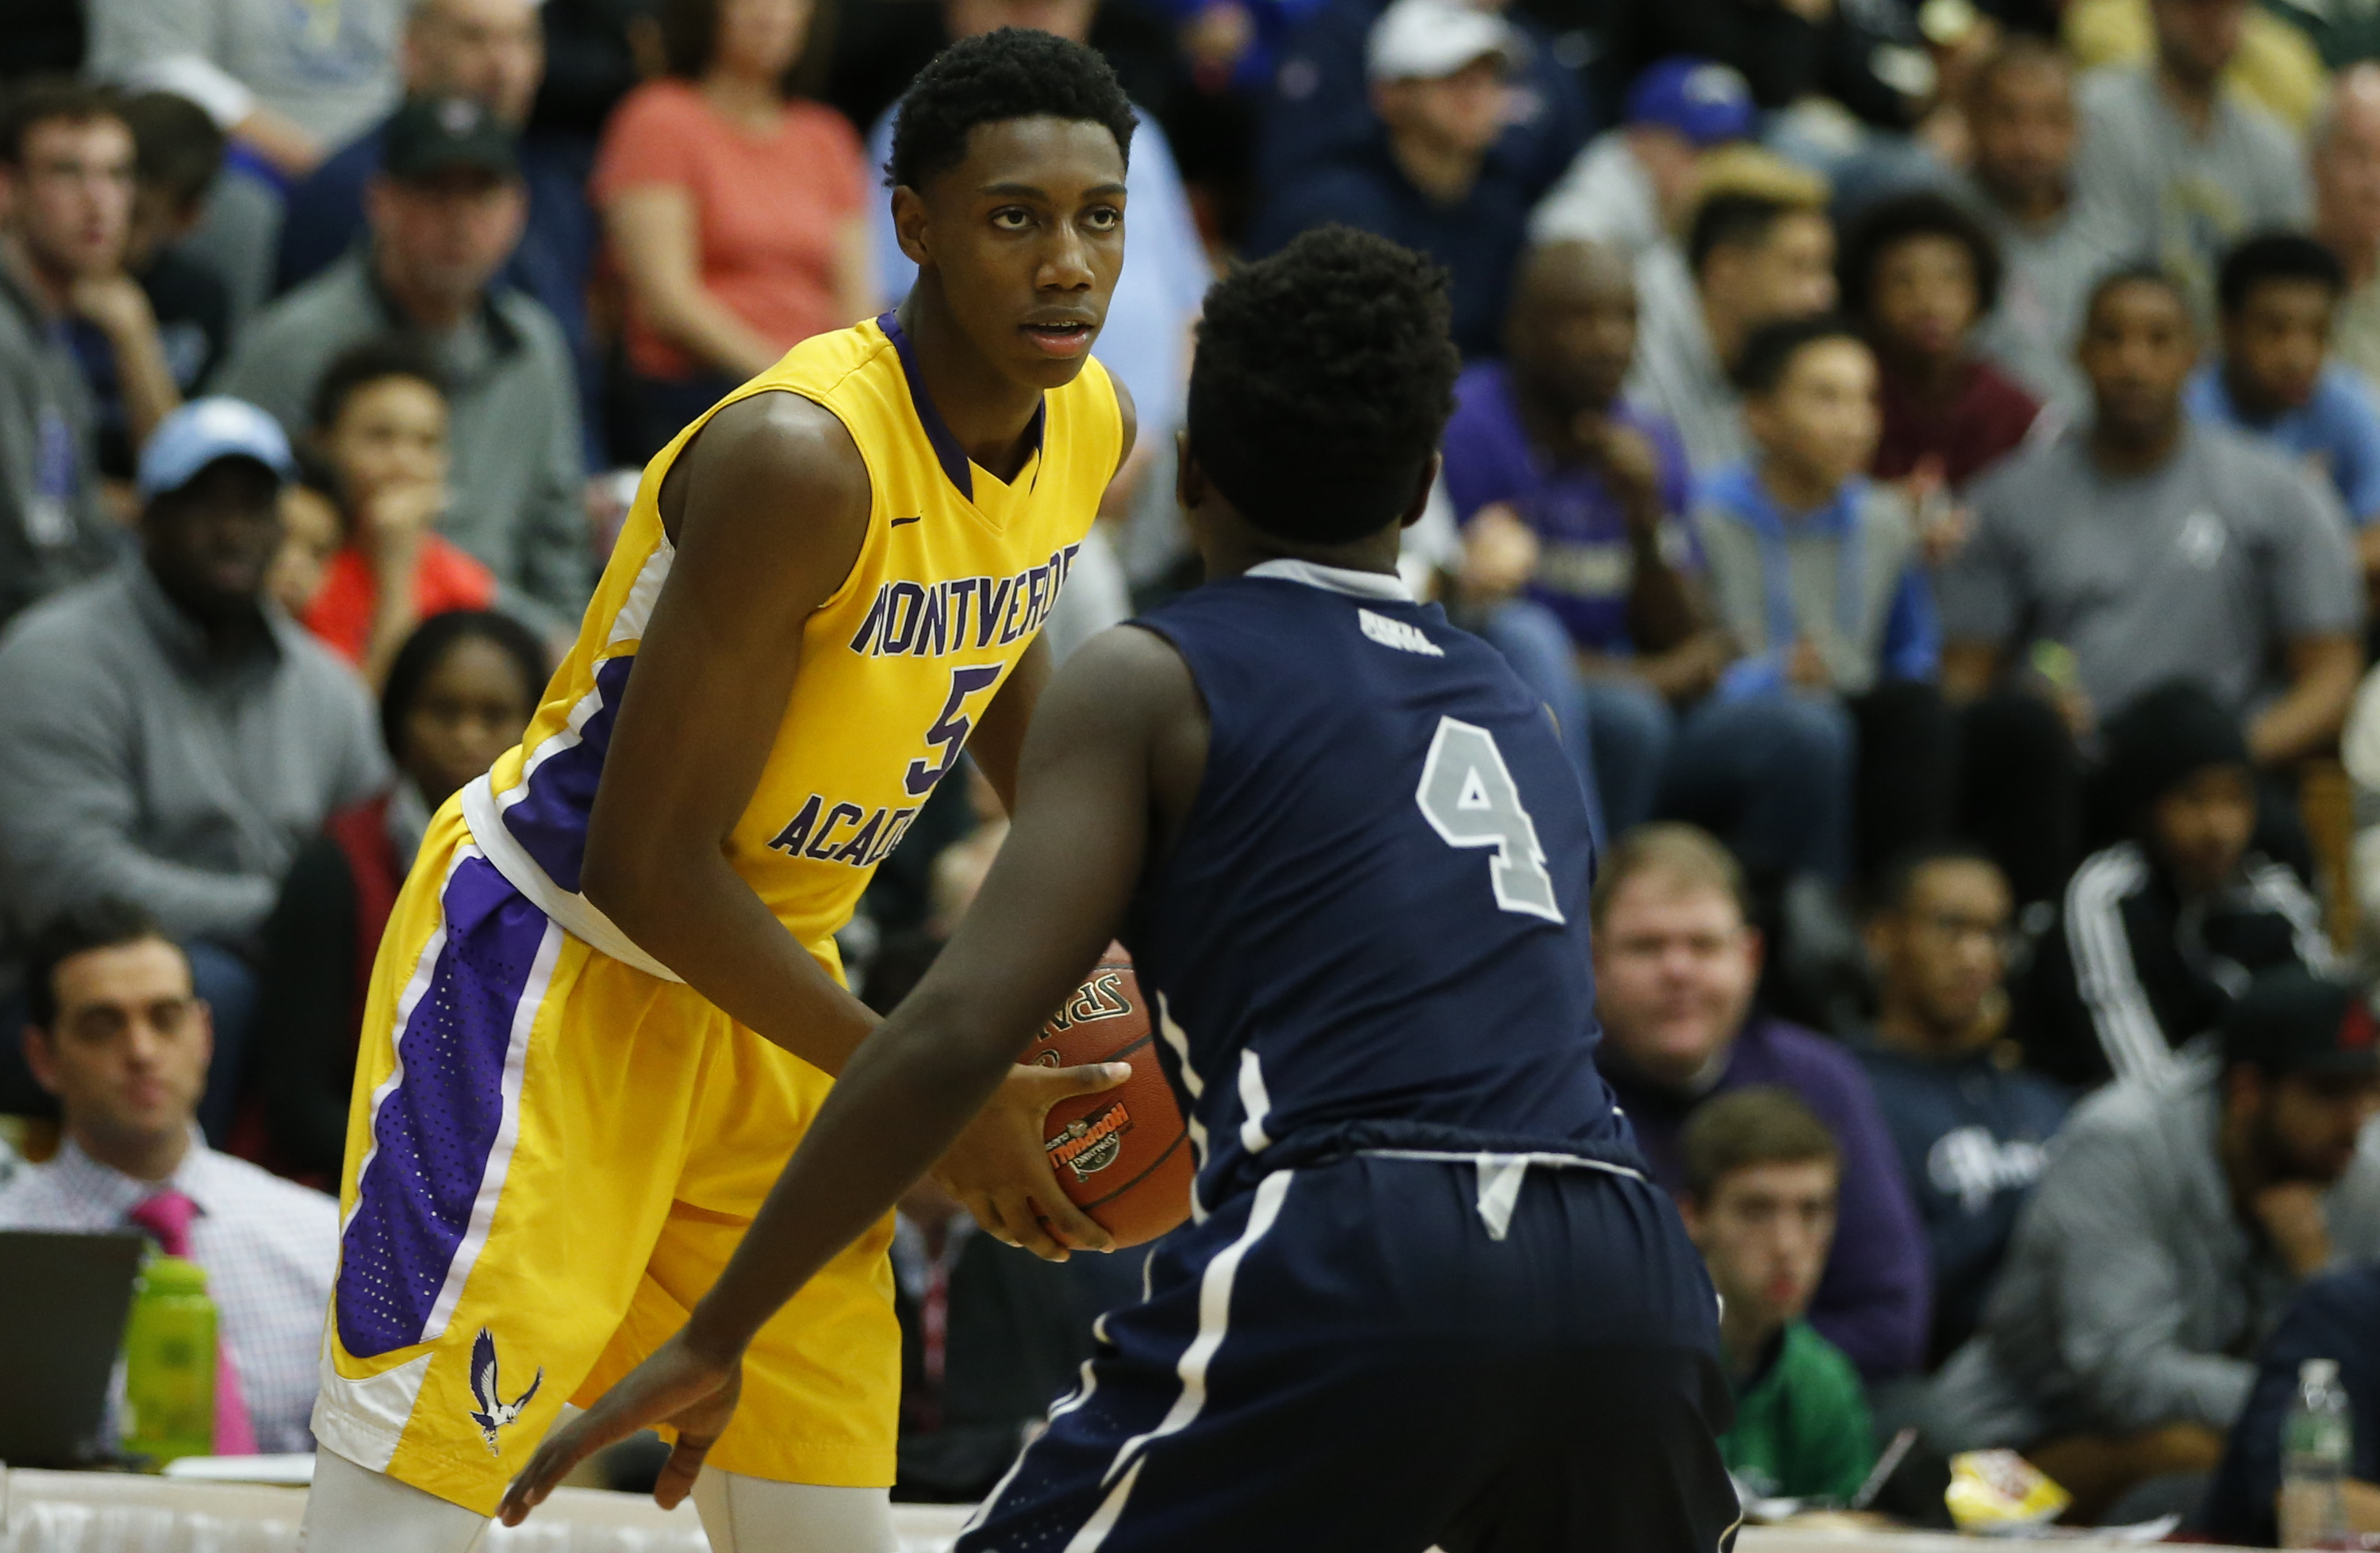 Jan 18, 2016 -- Springfield, MA, U.S.A -- Montverde RJ Barrett (5) looks for an opening against Sierra Canyon Devearl Ramsey (4) in the second half of the Spalding Hoophall Classic at Blake Arena in Springfield, Mass. -- Photo by David Butler II-USA Today Sports Images ORG XMIT: US 134344 Spalding Hoophal 1/17/2016 [Via MerlinFTP Drop]